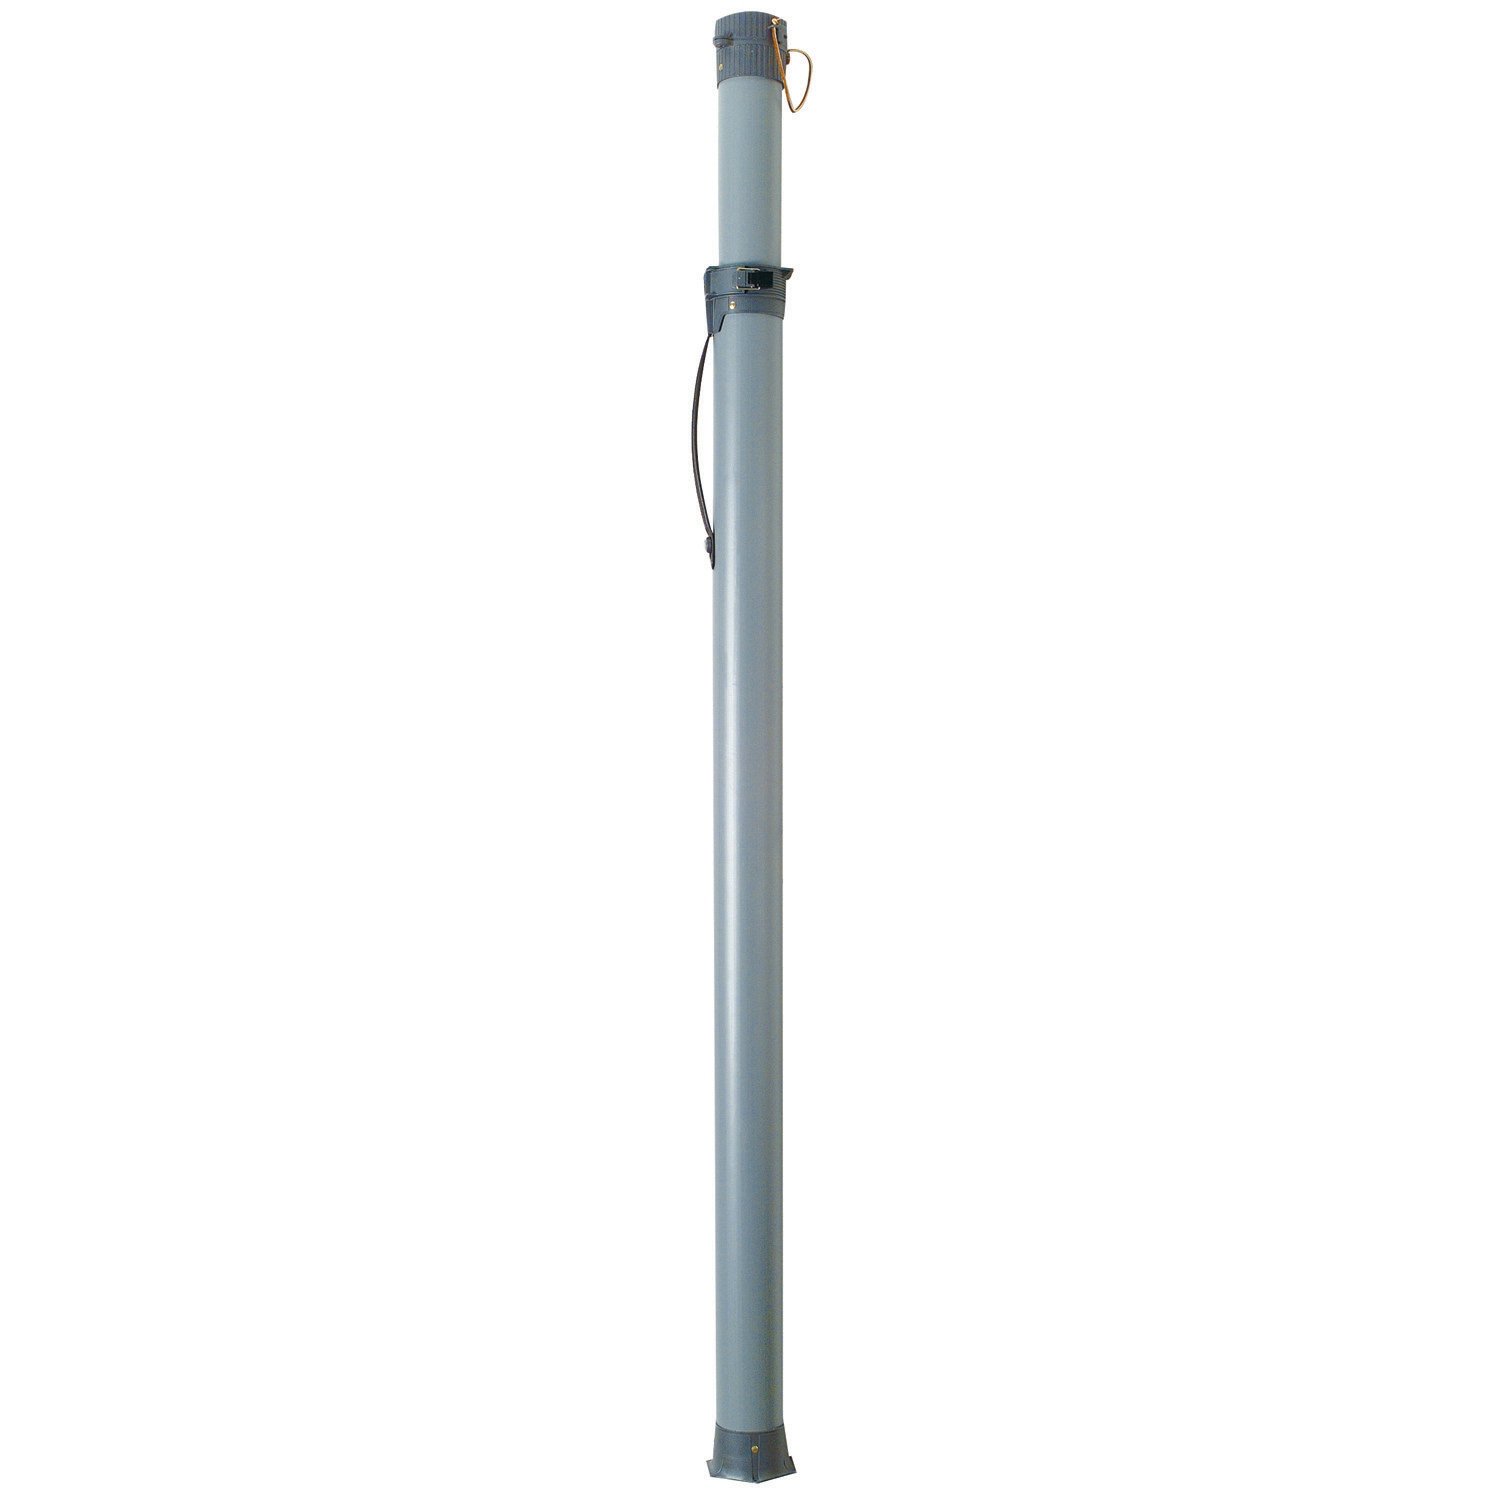 Plano 3 Adjustable Rod Case/ Telescoping Tube ☆ The Sporting